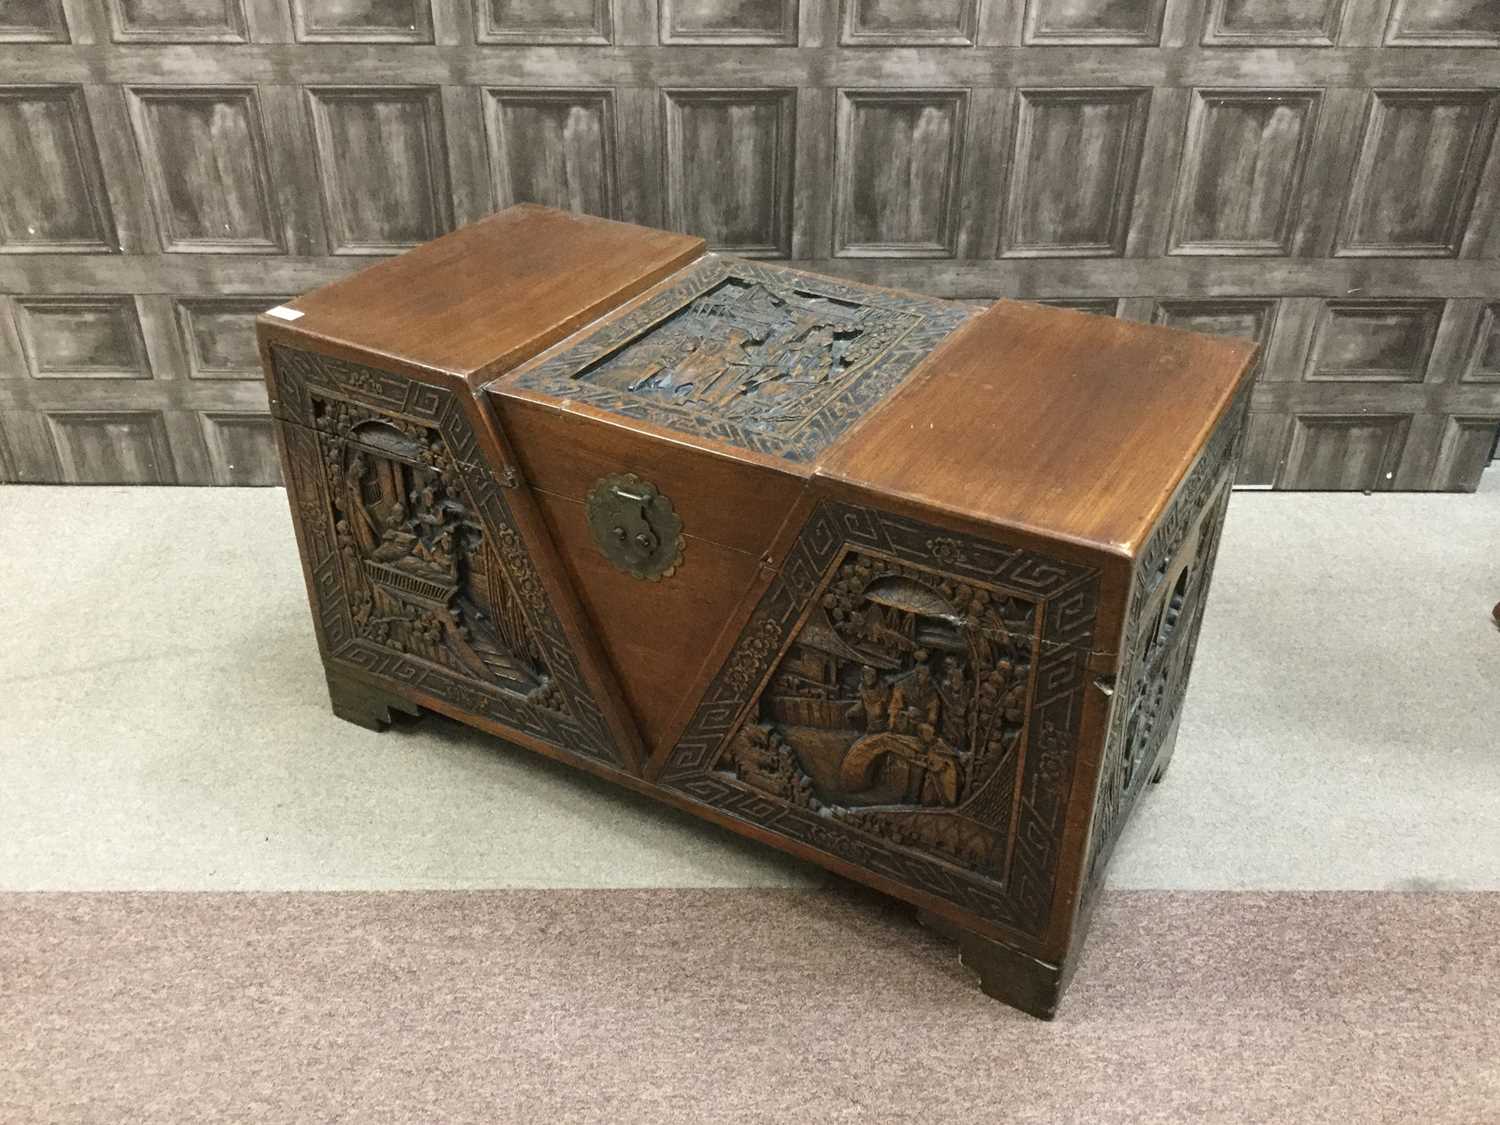 Lot 721 - AN EARLY 20TH CENTURY CHINESE CAMPHORWOOD CHEST